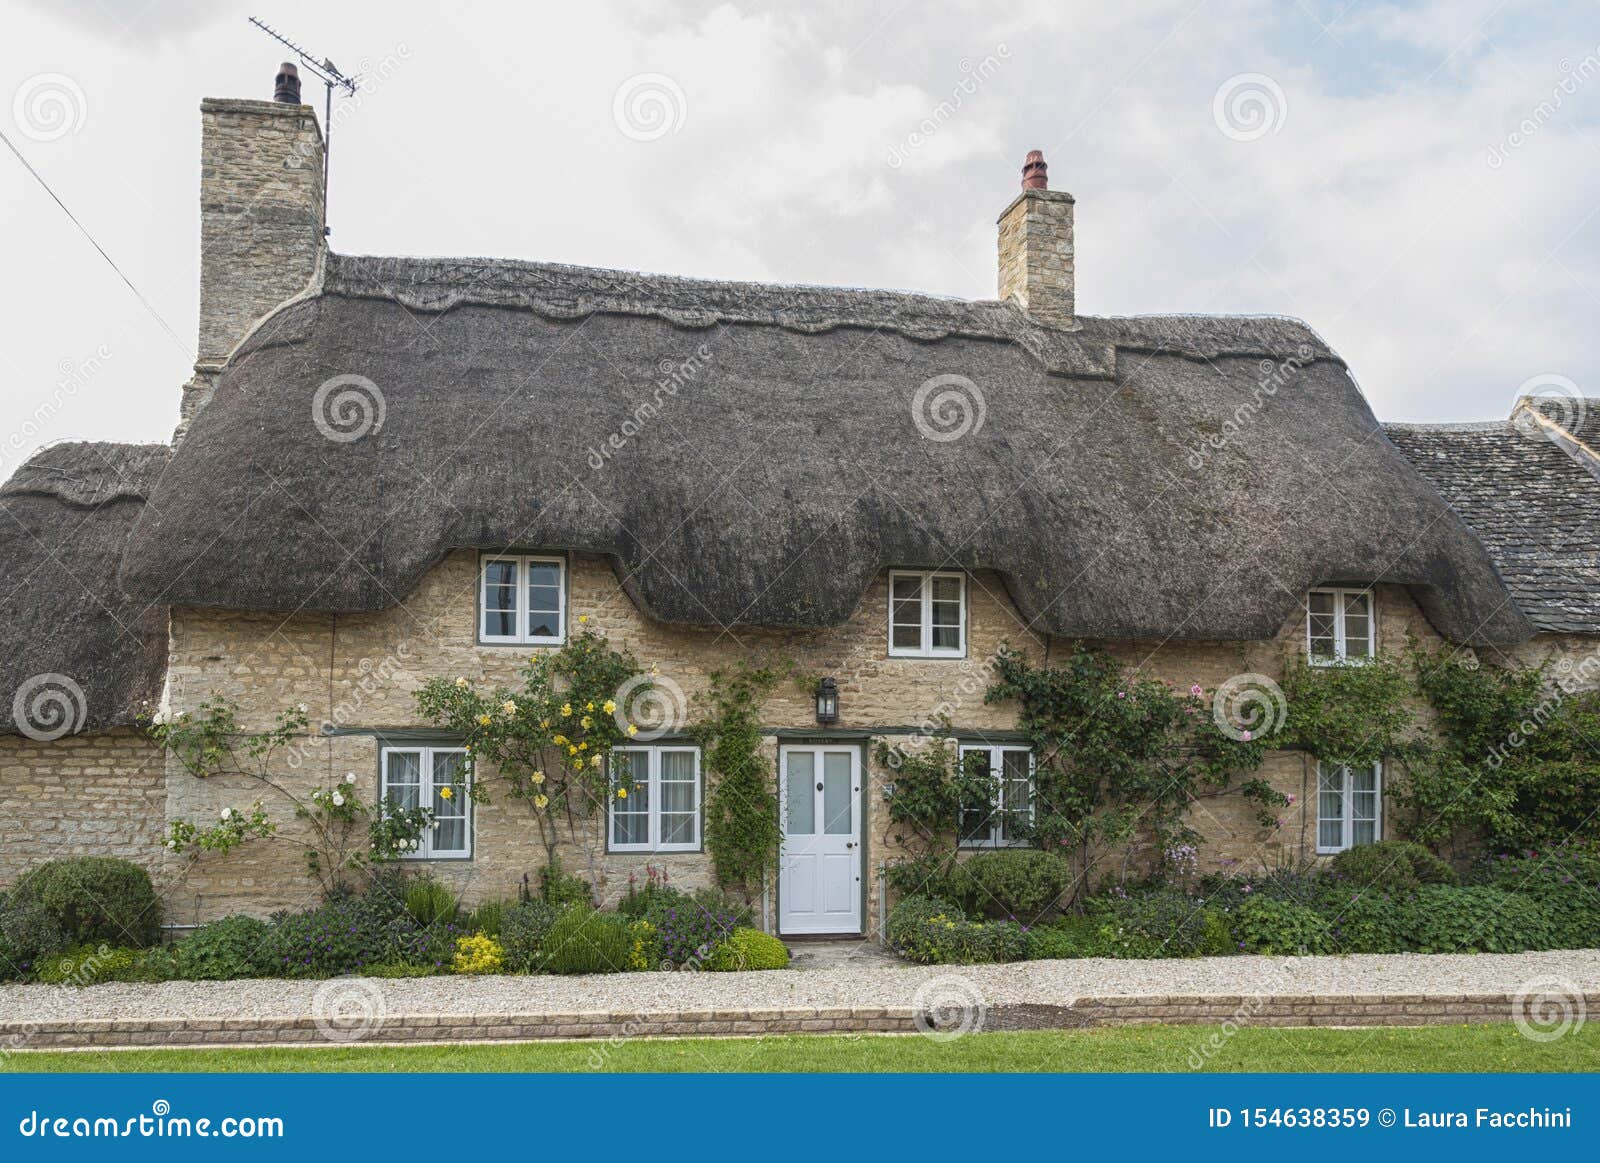 Narrow Lane With Romantic Thatched Houses And Stone Cottages In